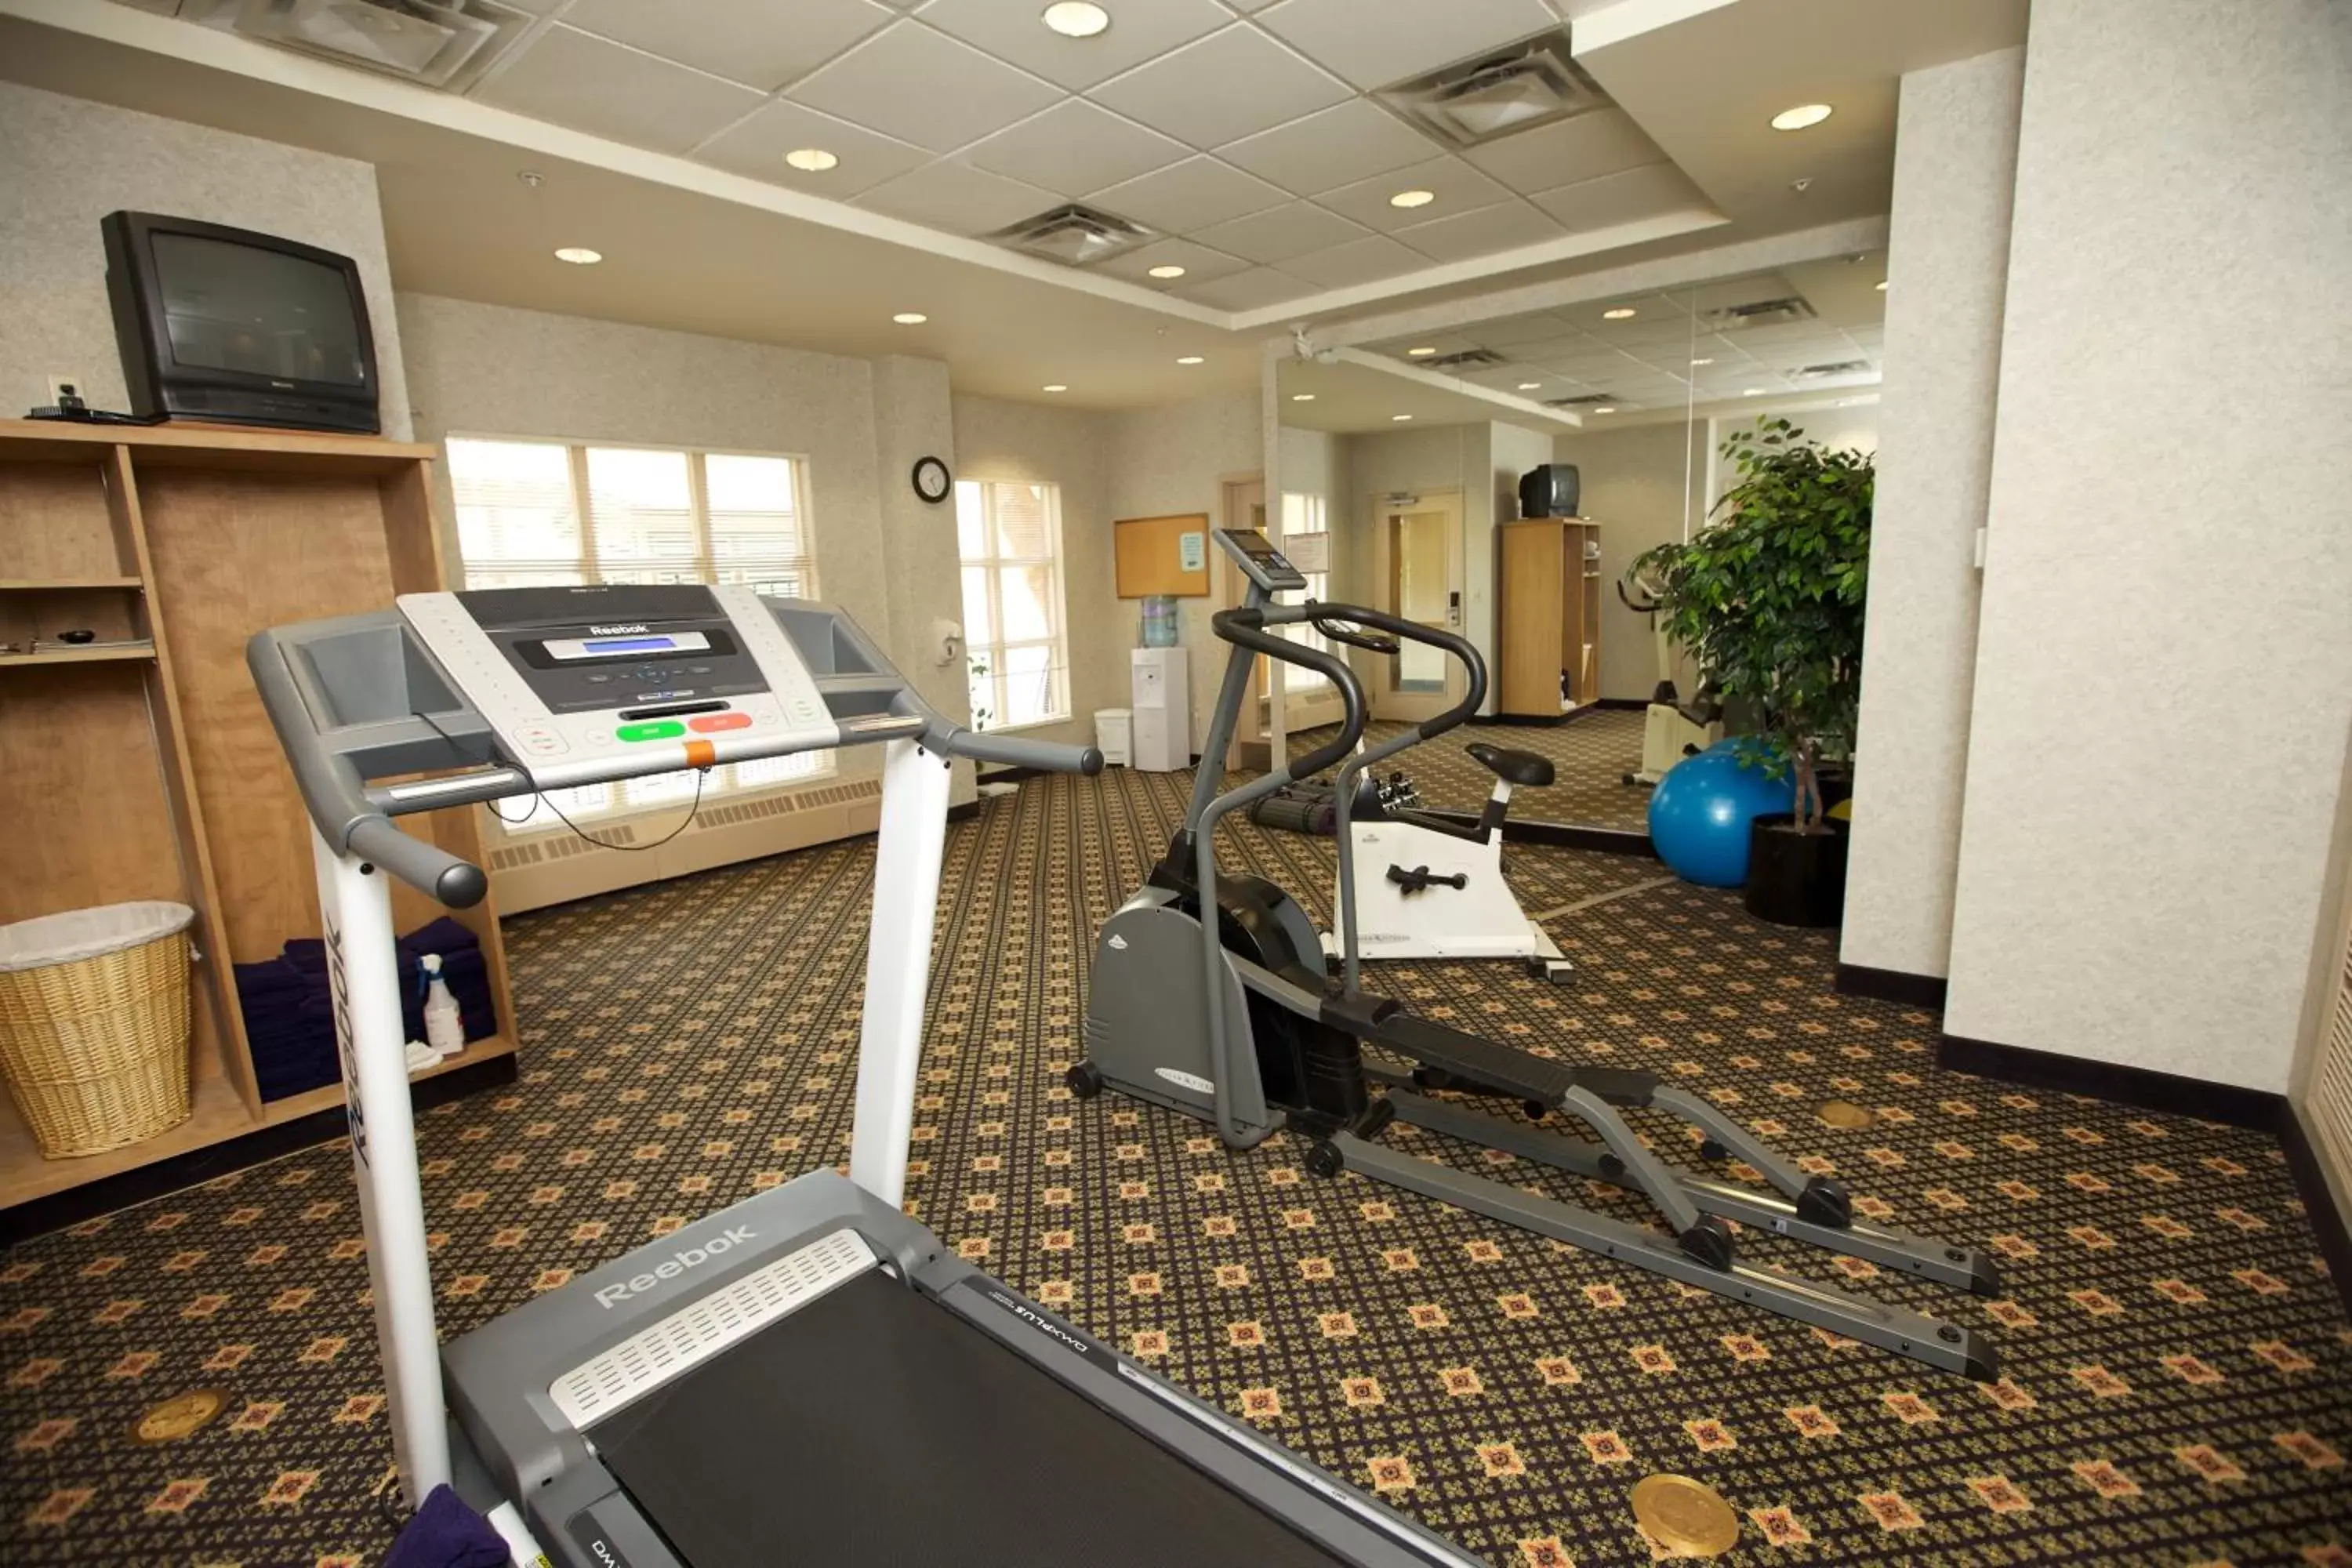 Fitness centre/facilities, Fitness Center/Facilities in Trickle Creek Lodge